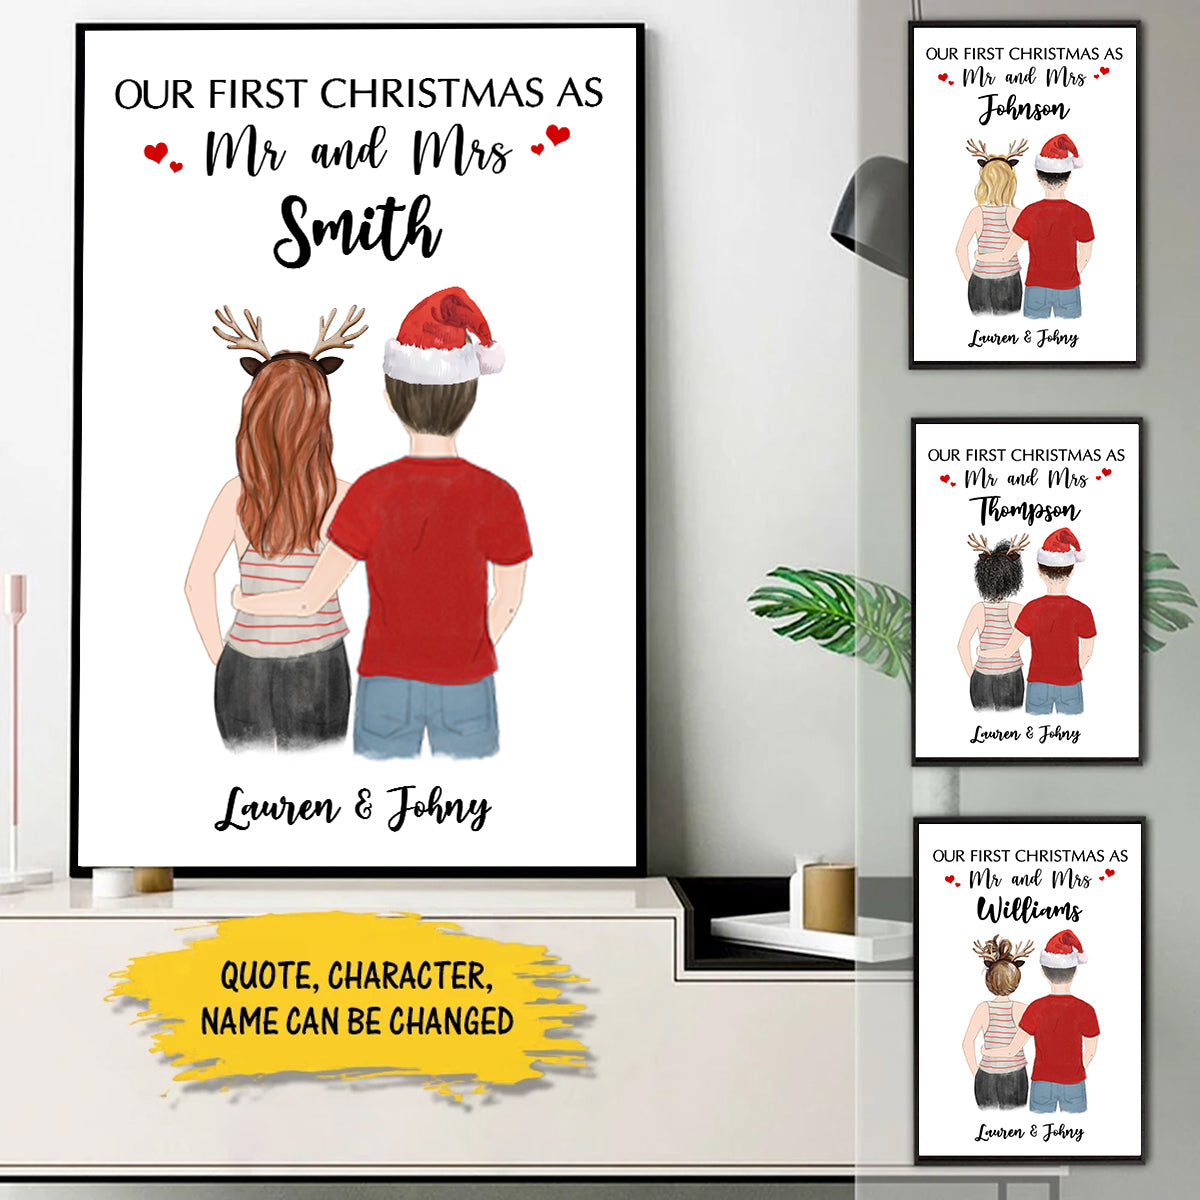 Just Married Couple - Our First Christmas As Mr & Mrs - Poster TD98-20